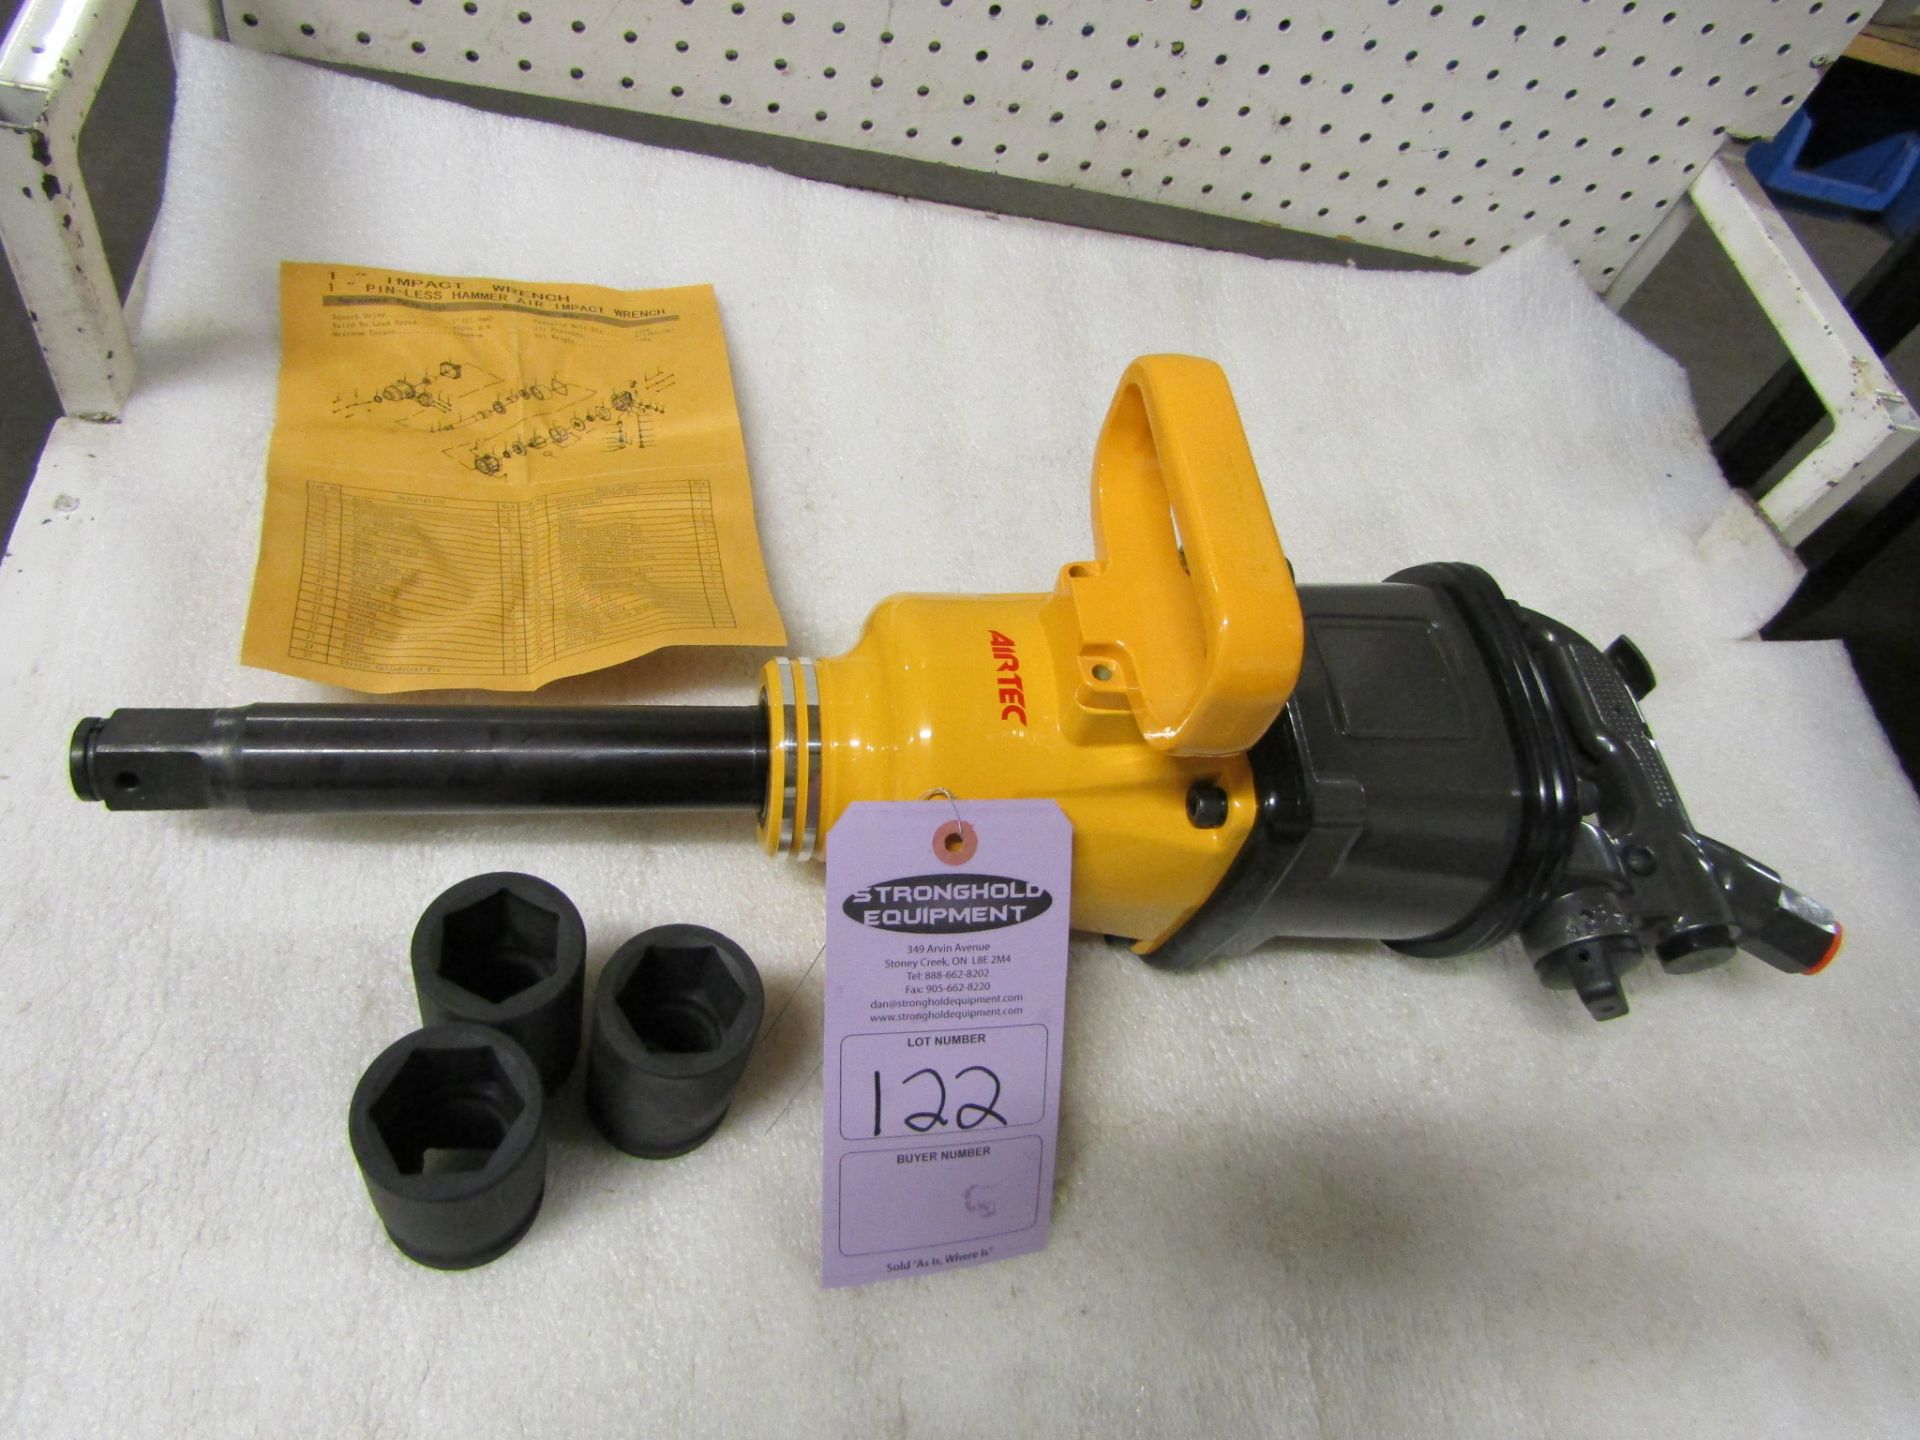 Airtec Extended Reach 1" Drive Air Impact Wrench - MINT UNUSED impact gun complete with sockets in